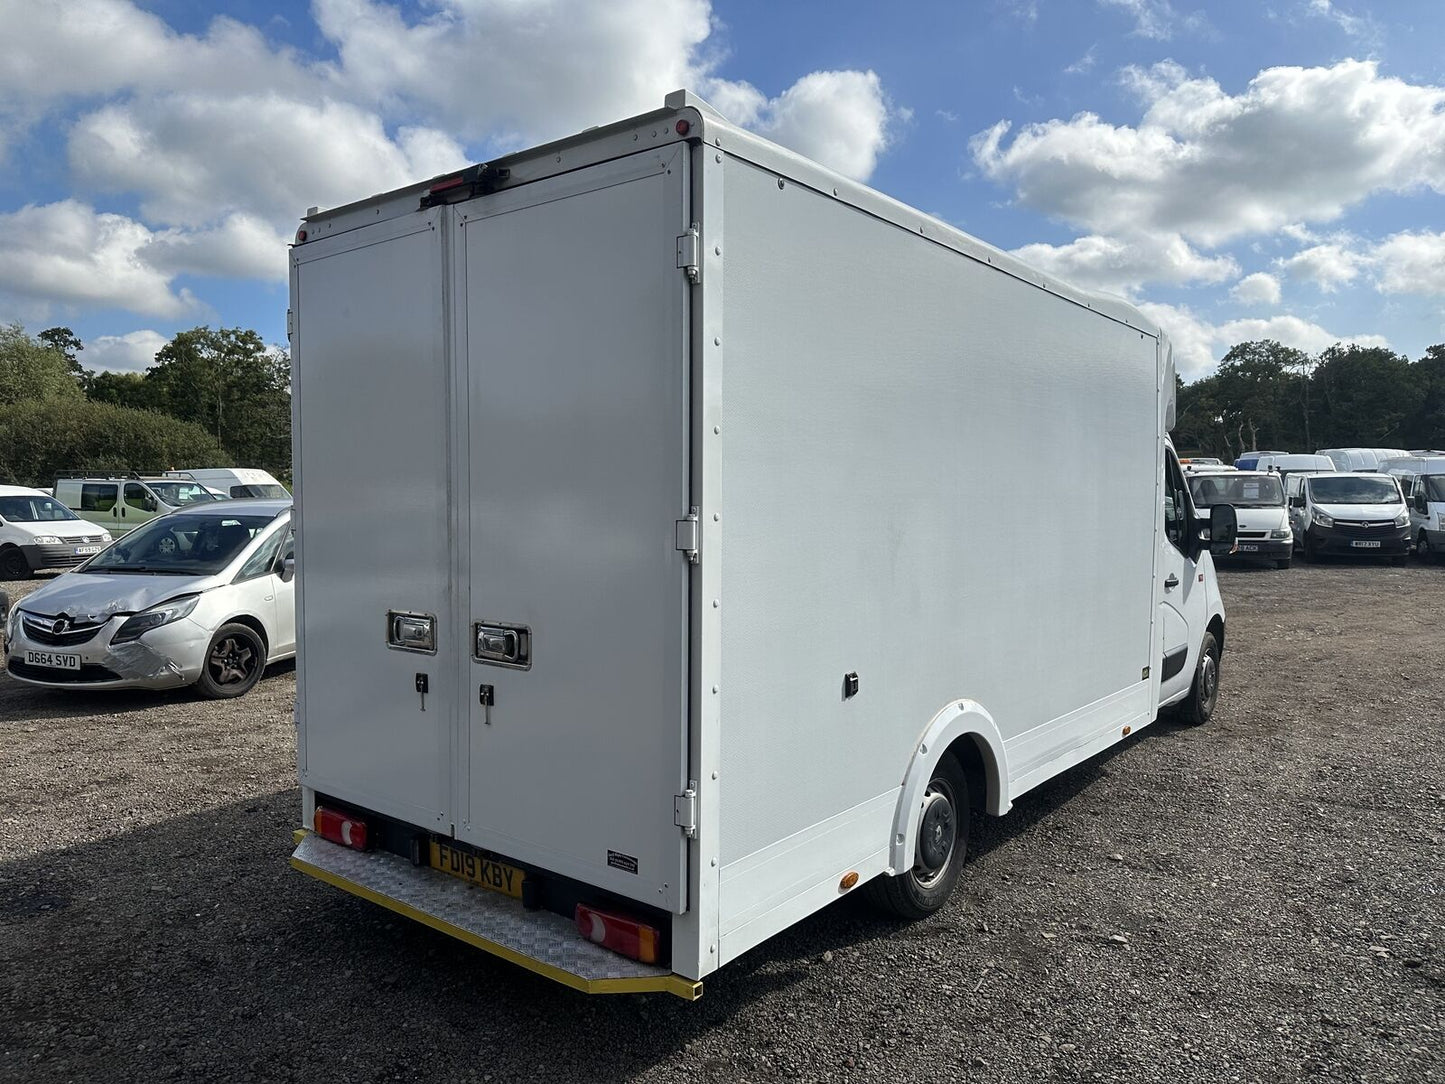 Bid on EFFICIENT EURO 6 WORK VAN: 2019 RENAULT MASTER MOVANO (NO VAT ON HAMMER)- Buy &amp; Sell on Auction with EAMA Group